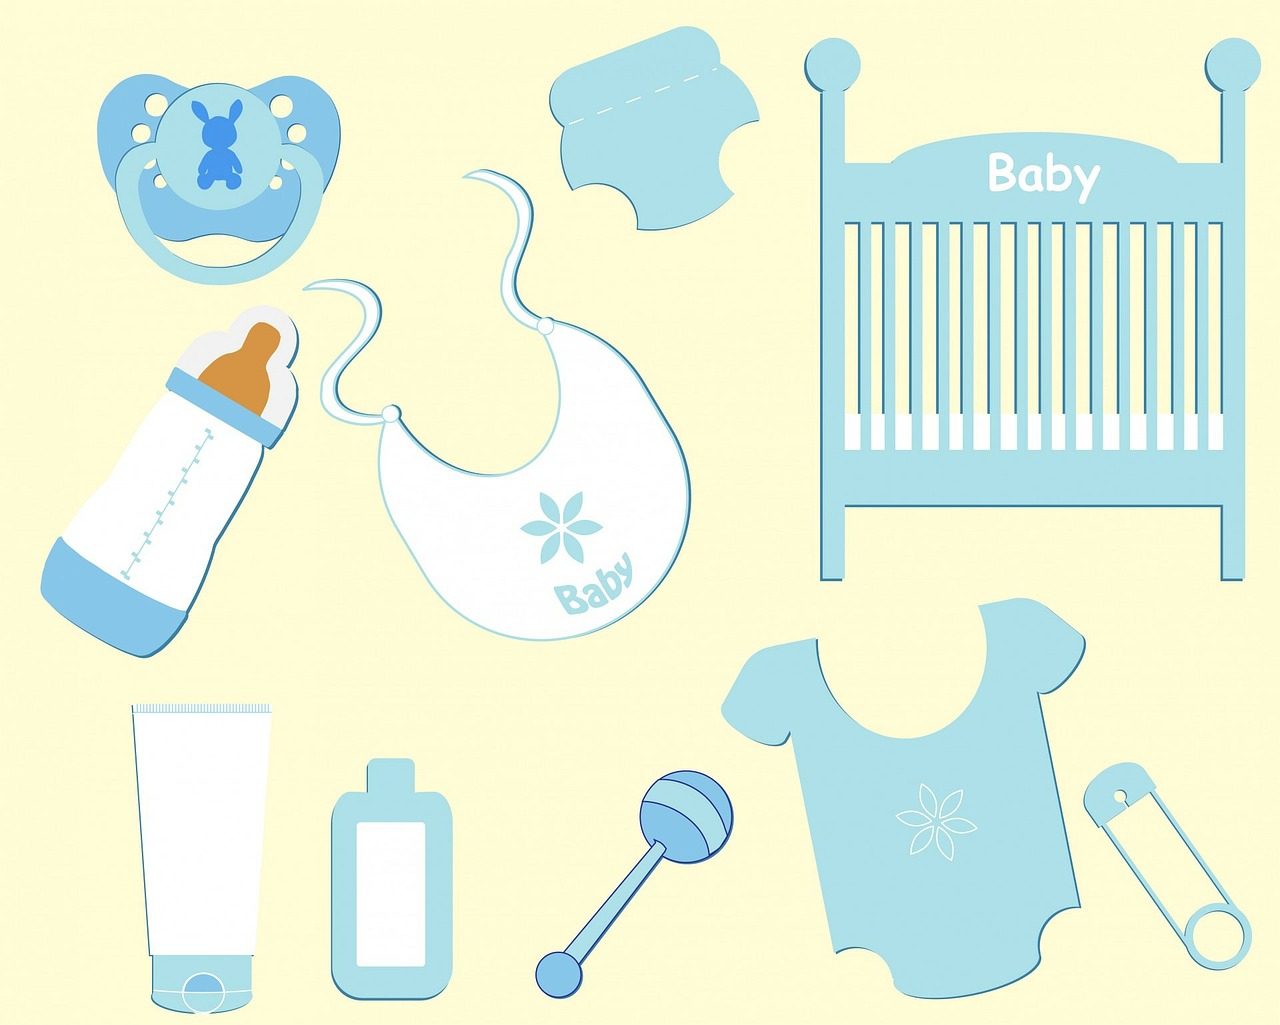 Baby Basics: Organic Ingredients and Recipes for DIY Baby Products